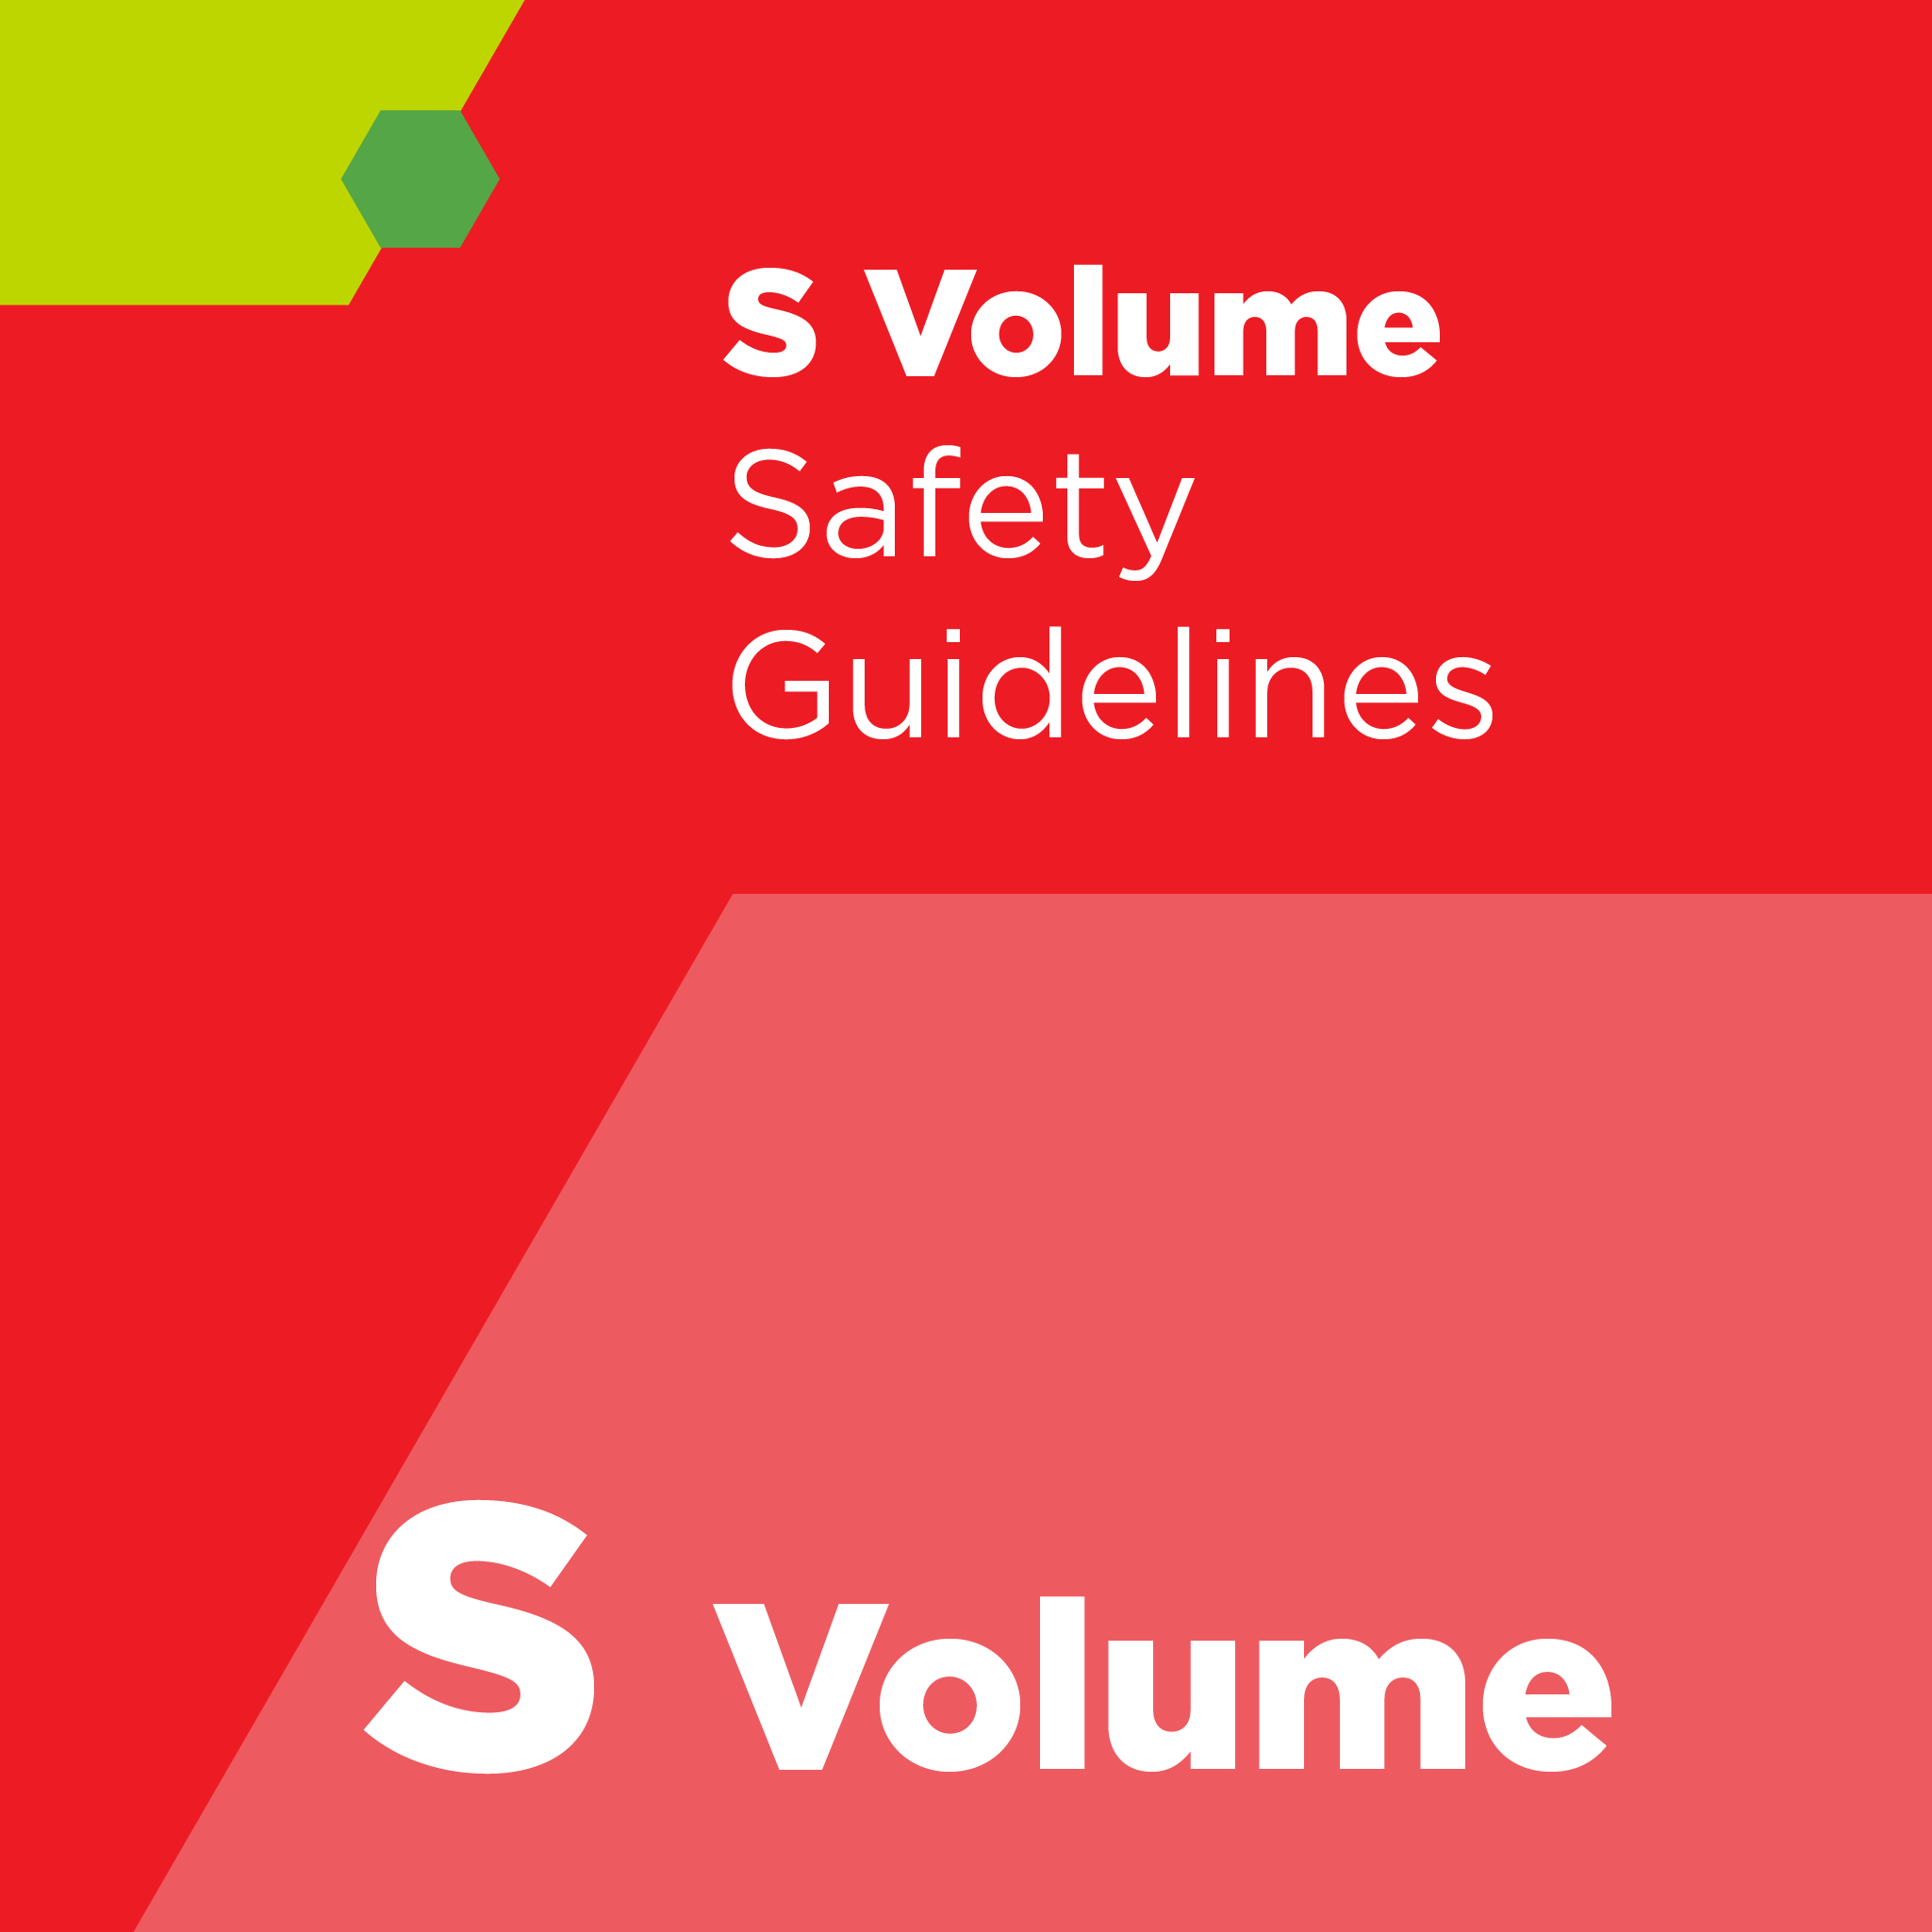 S01200 - SEMI S12 - Environmental, Health and Safety Guideline for Manufacturing Equipment Decontamination